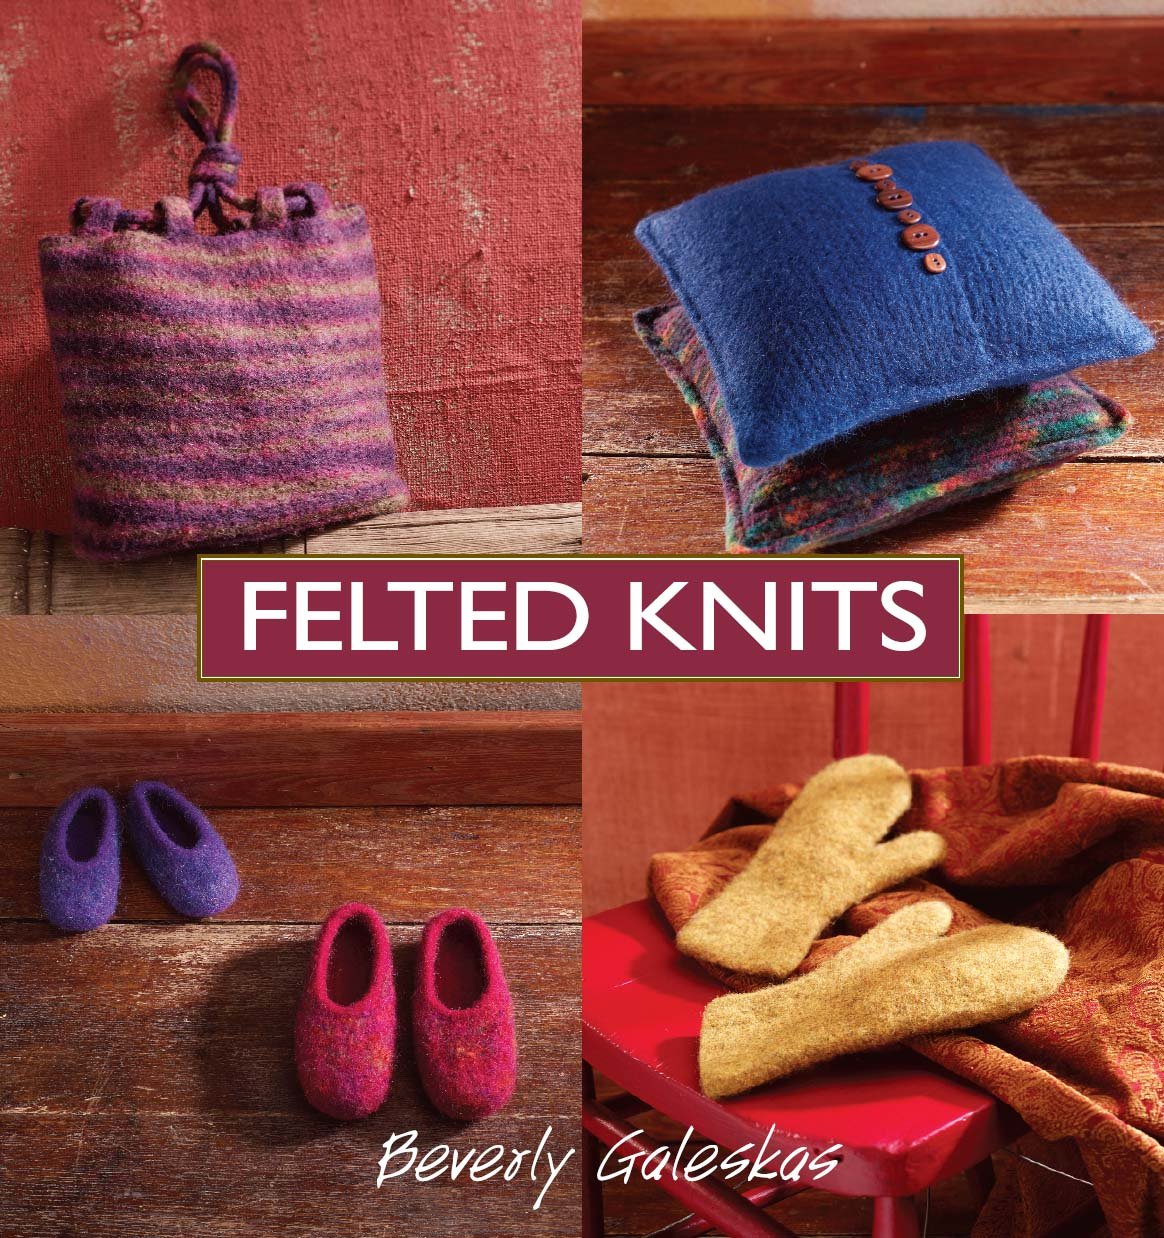 Felted Knits by Beverly Galeskas - FREE US Shipping